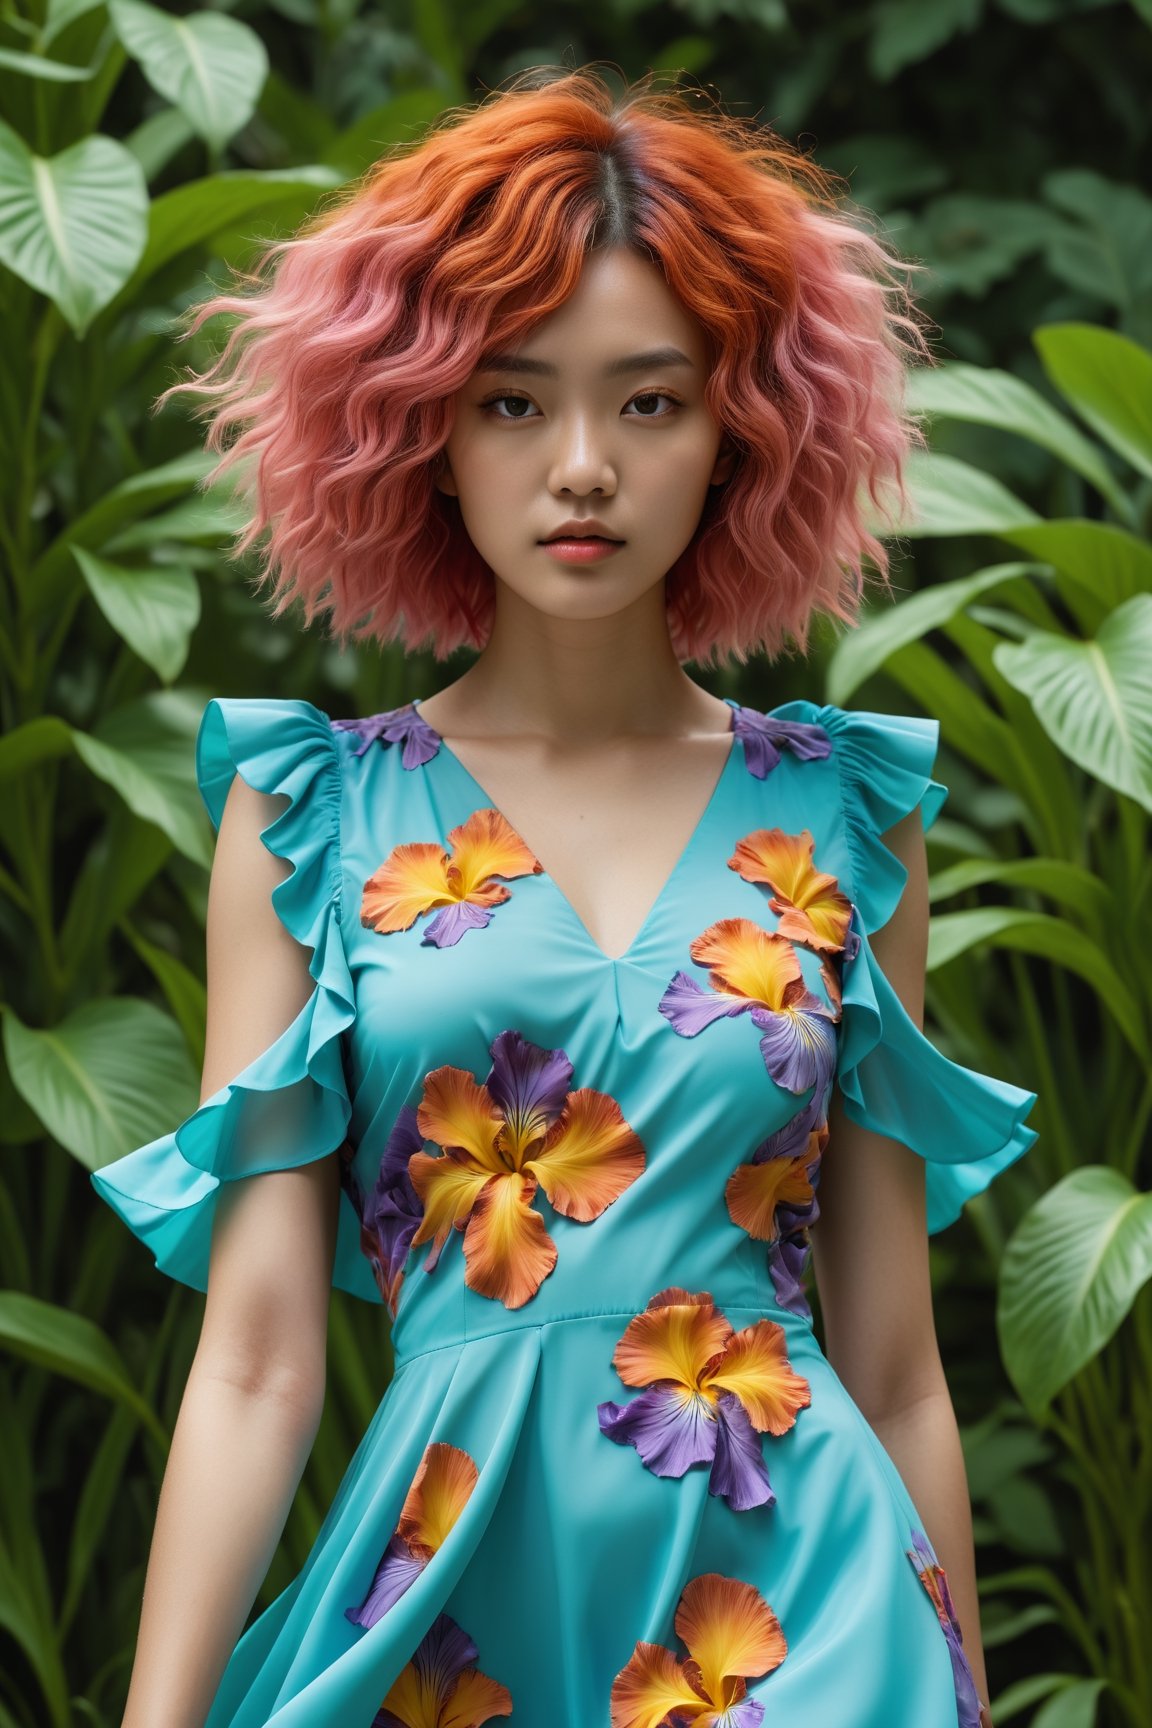 HONG KONG Girl ((September Ai)) with brown colour skin, AQUA short messy hair, 

(best quality, 4k, 8k, highres, masterpiece), ultra-detailed, (realistic, photorealistic, photo-realistic), outdoor photoshoot, summer fashion, stunning model with vibrant multicolored hair, wearing a bright, floral-patterned Iris van Herpen dress, dynamic runway setting, lush garden background, vivid, lively, sunlit, high-fashion editorial, magazine photoshoot, energetic fashion poses, kaleidoscope of colors
